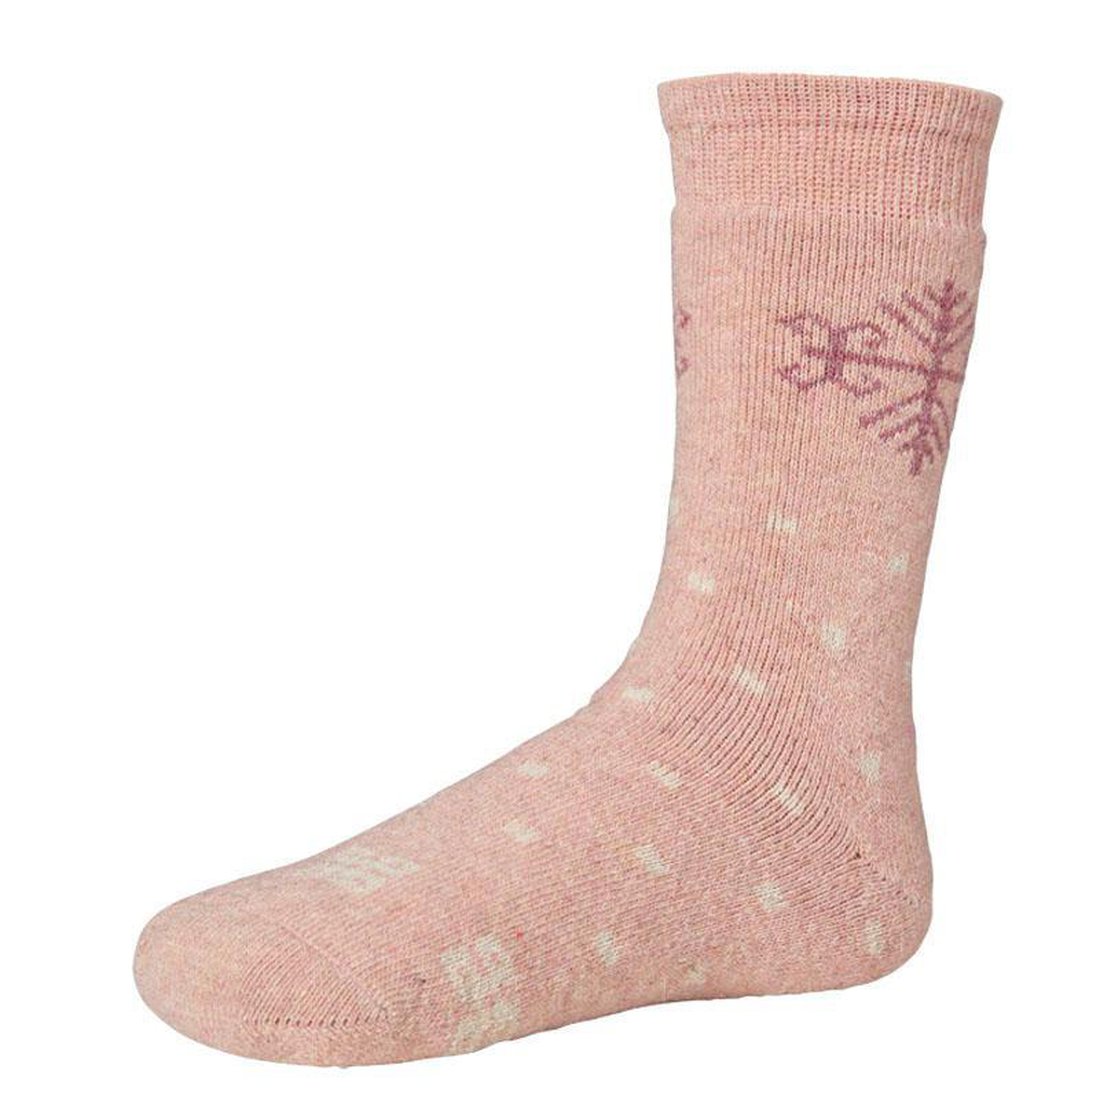 Ysabel Mora 12720 Snowflake Sock - Warm and cozy thick knitted pale light pink socks with a touch of wool and angora, with a snowflake motif and all over dotted square pattern.